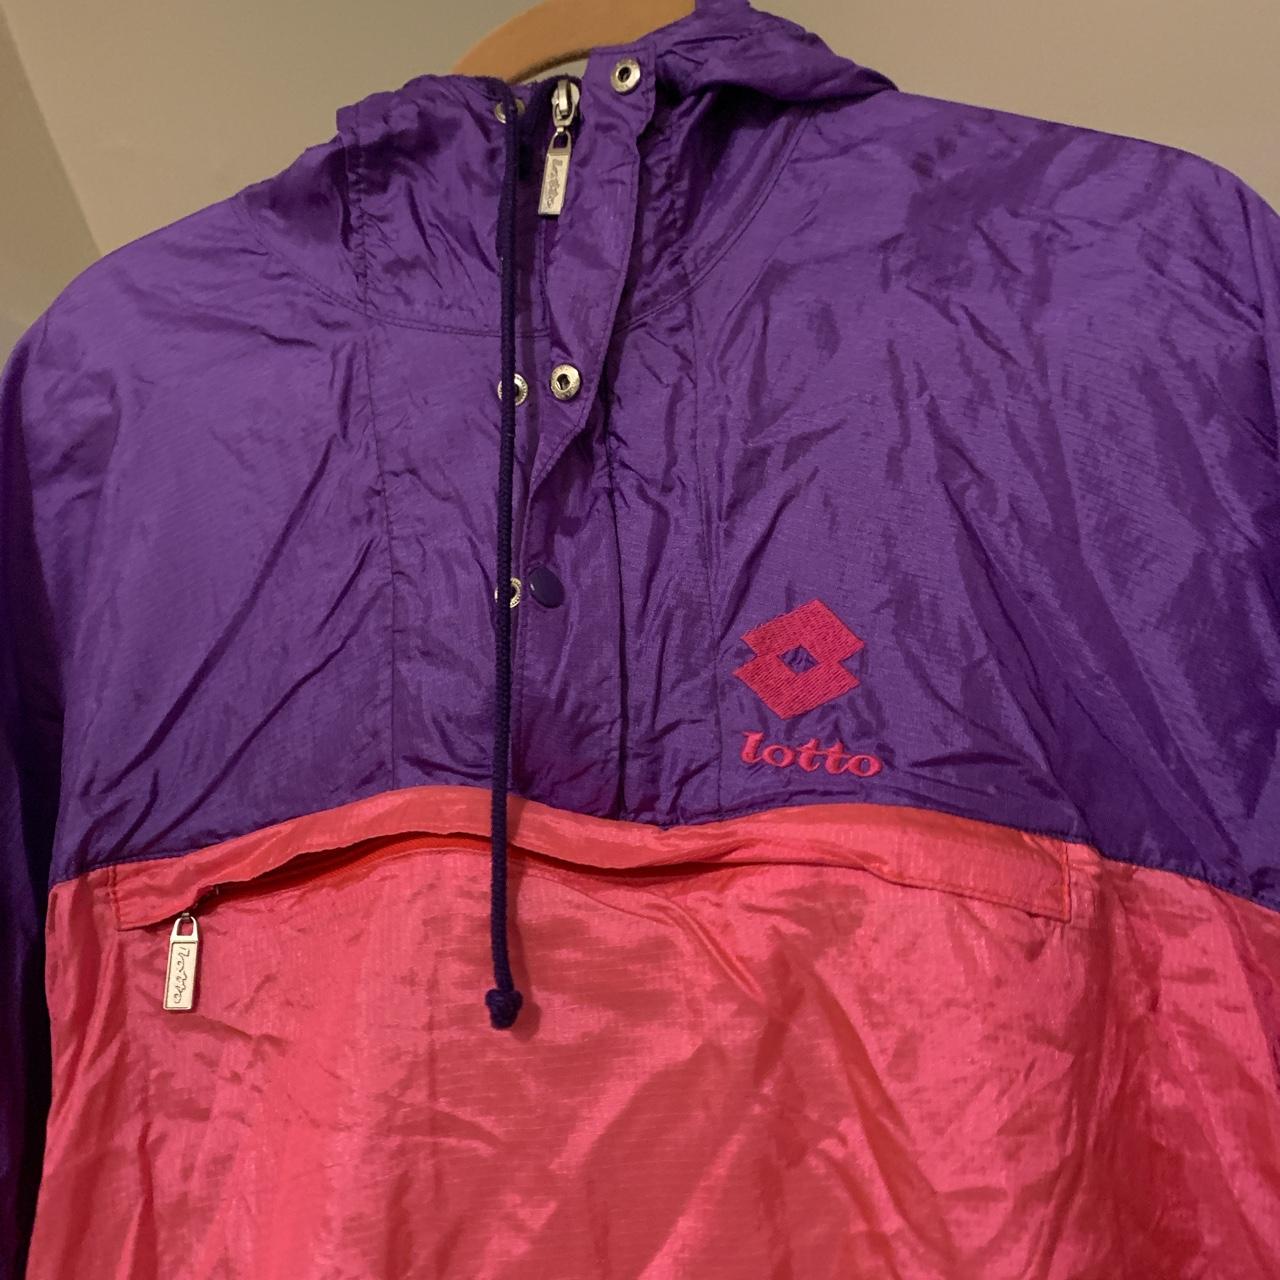 Lotto Men's Pink and Purple Jacket